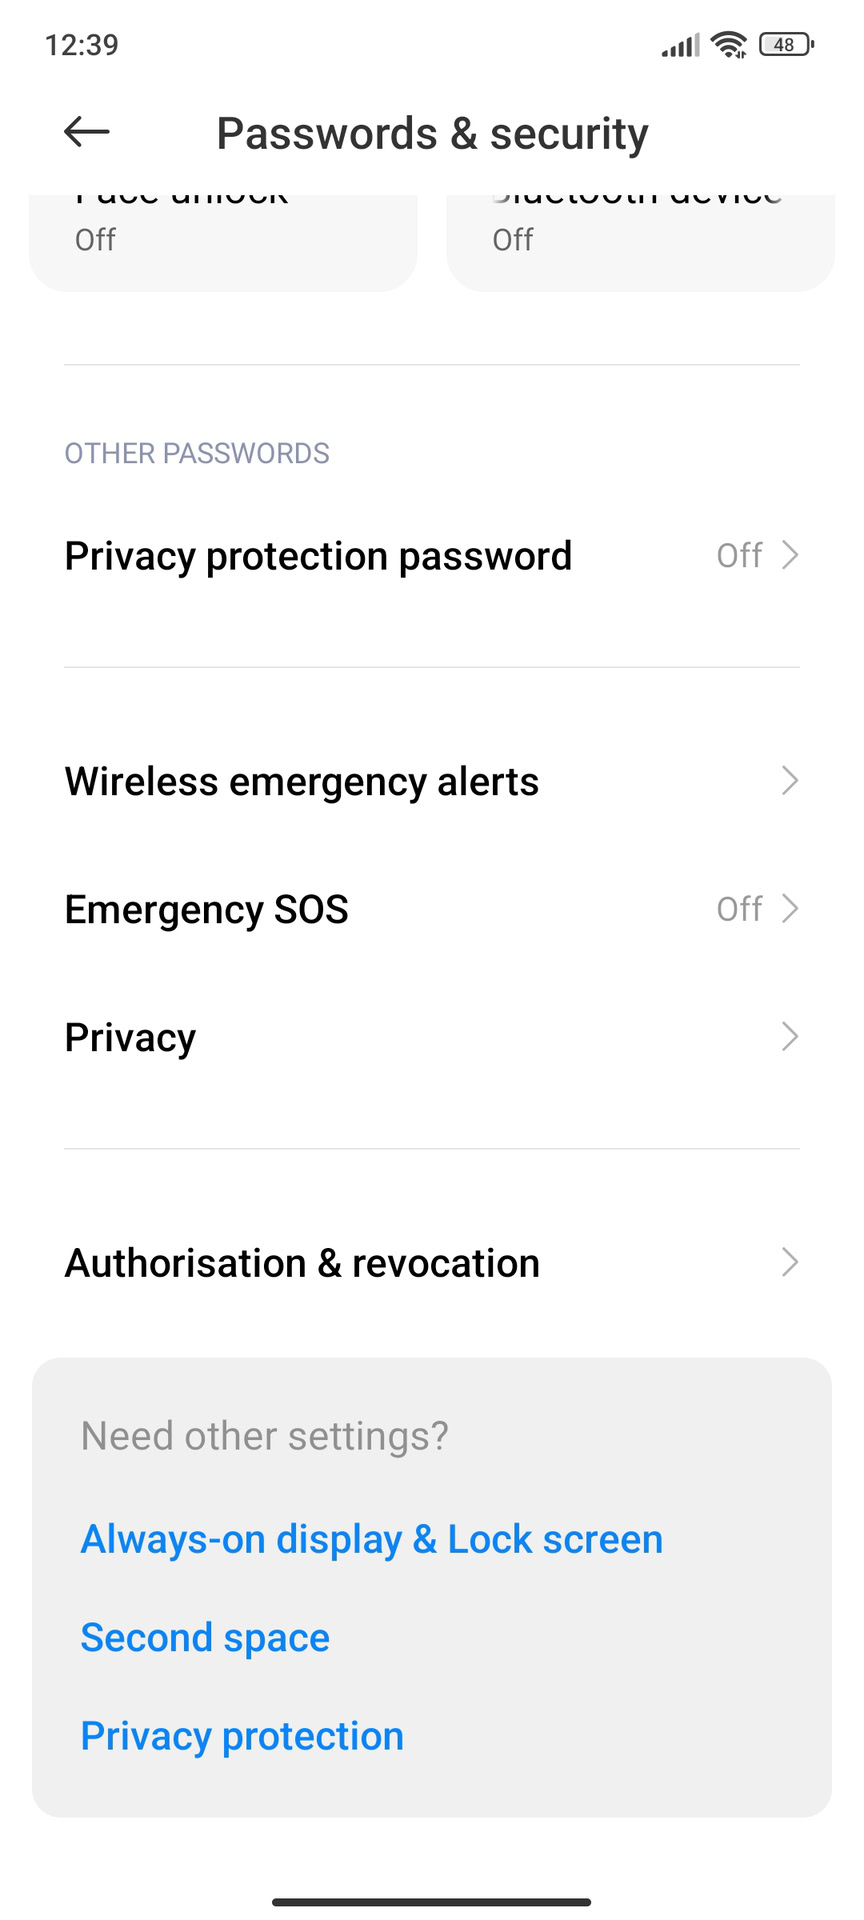 MIUI system ads passwords and security